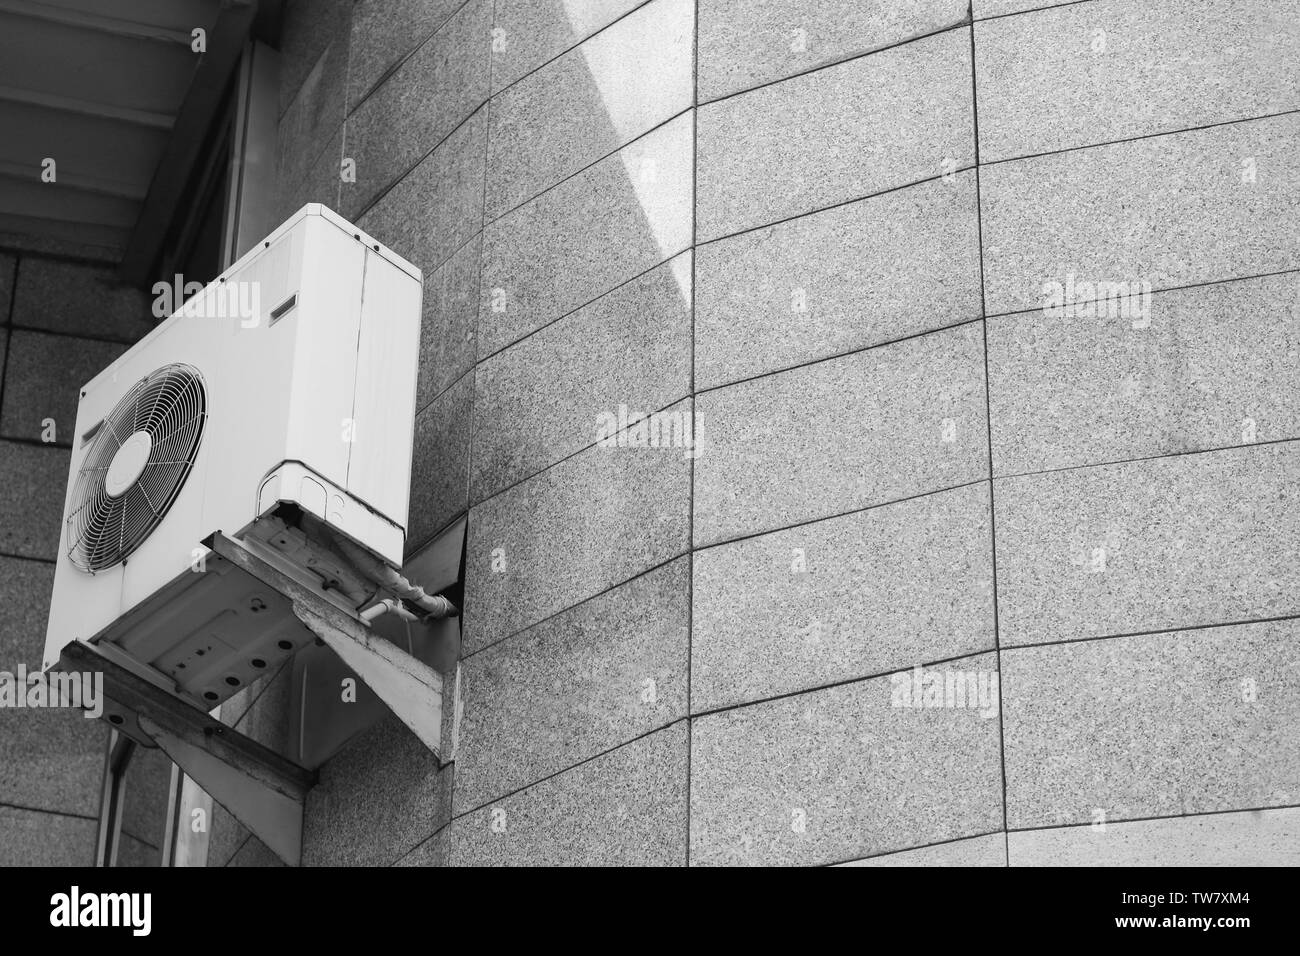 Air conditioner on wall of building, outdoors Stock Photo